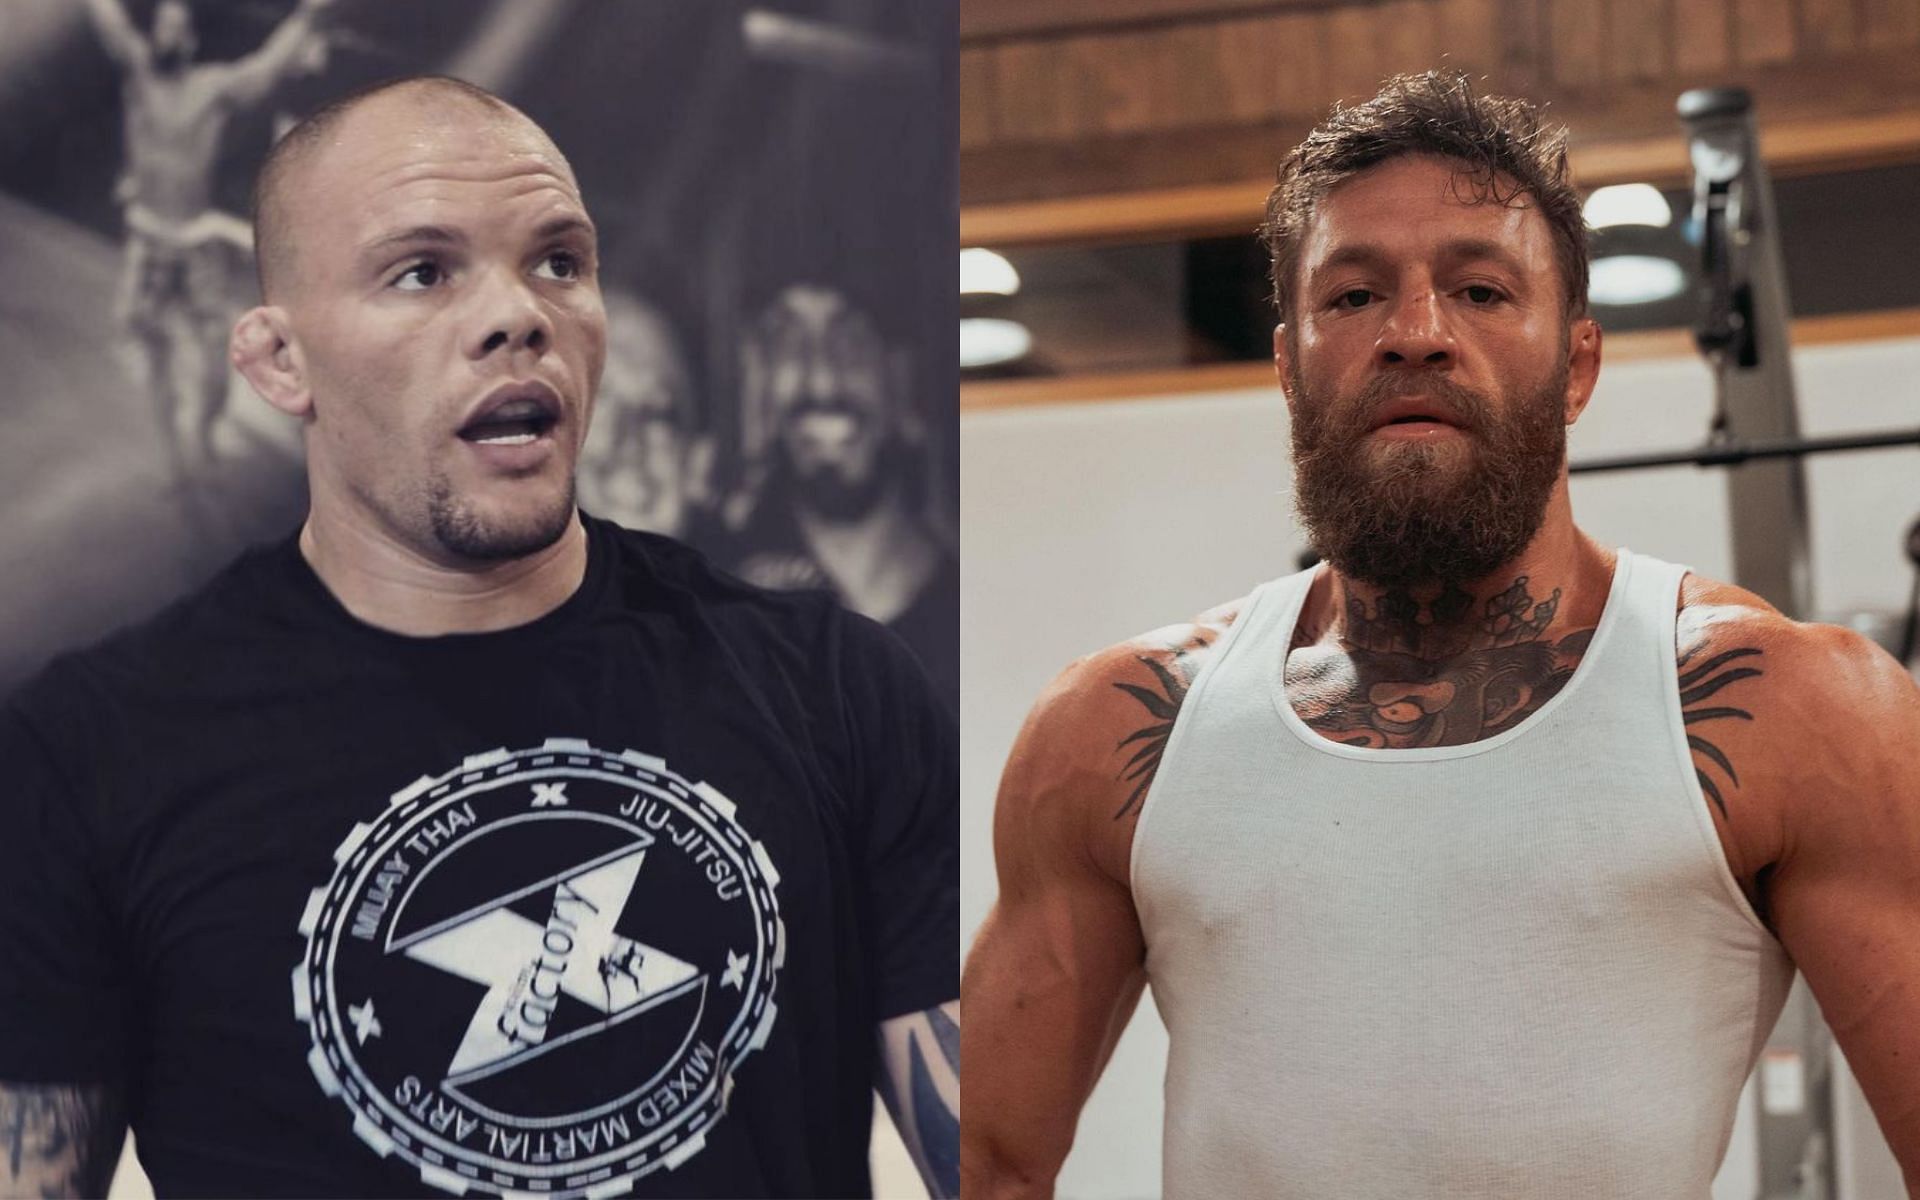 Anthony Smith (Left) and Conor McGregor (Right) [Image courtesy: @lionheartasmith and @thenotoriousmma on Instagram]